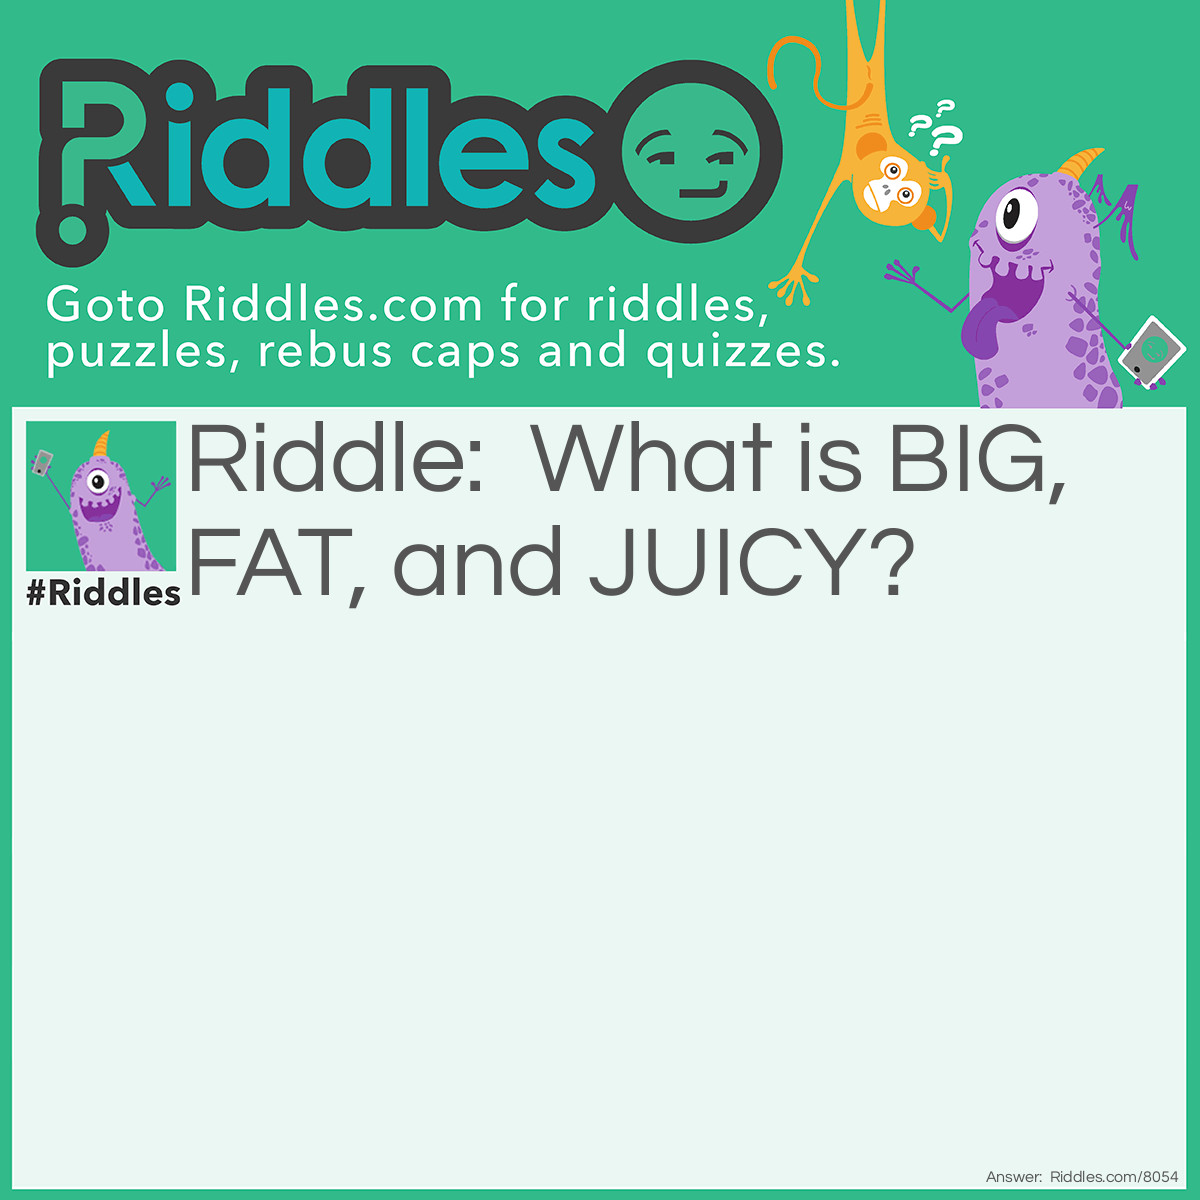 Riddle: What is BIG, FAT, and JUICY? Answer: A good BURGER!